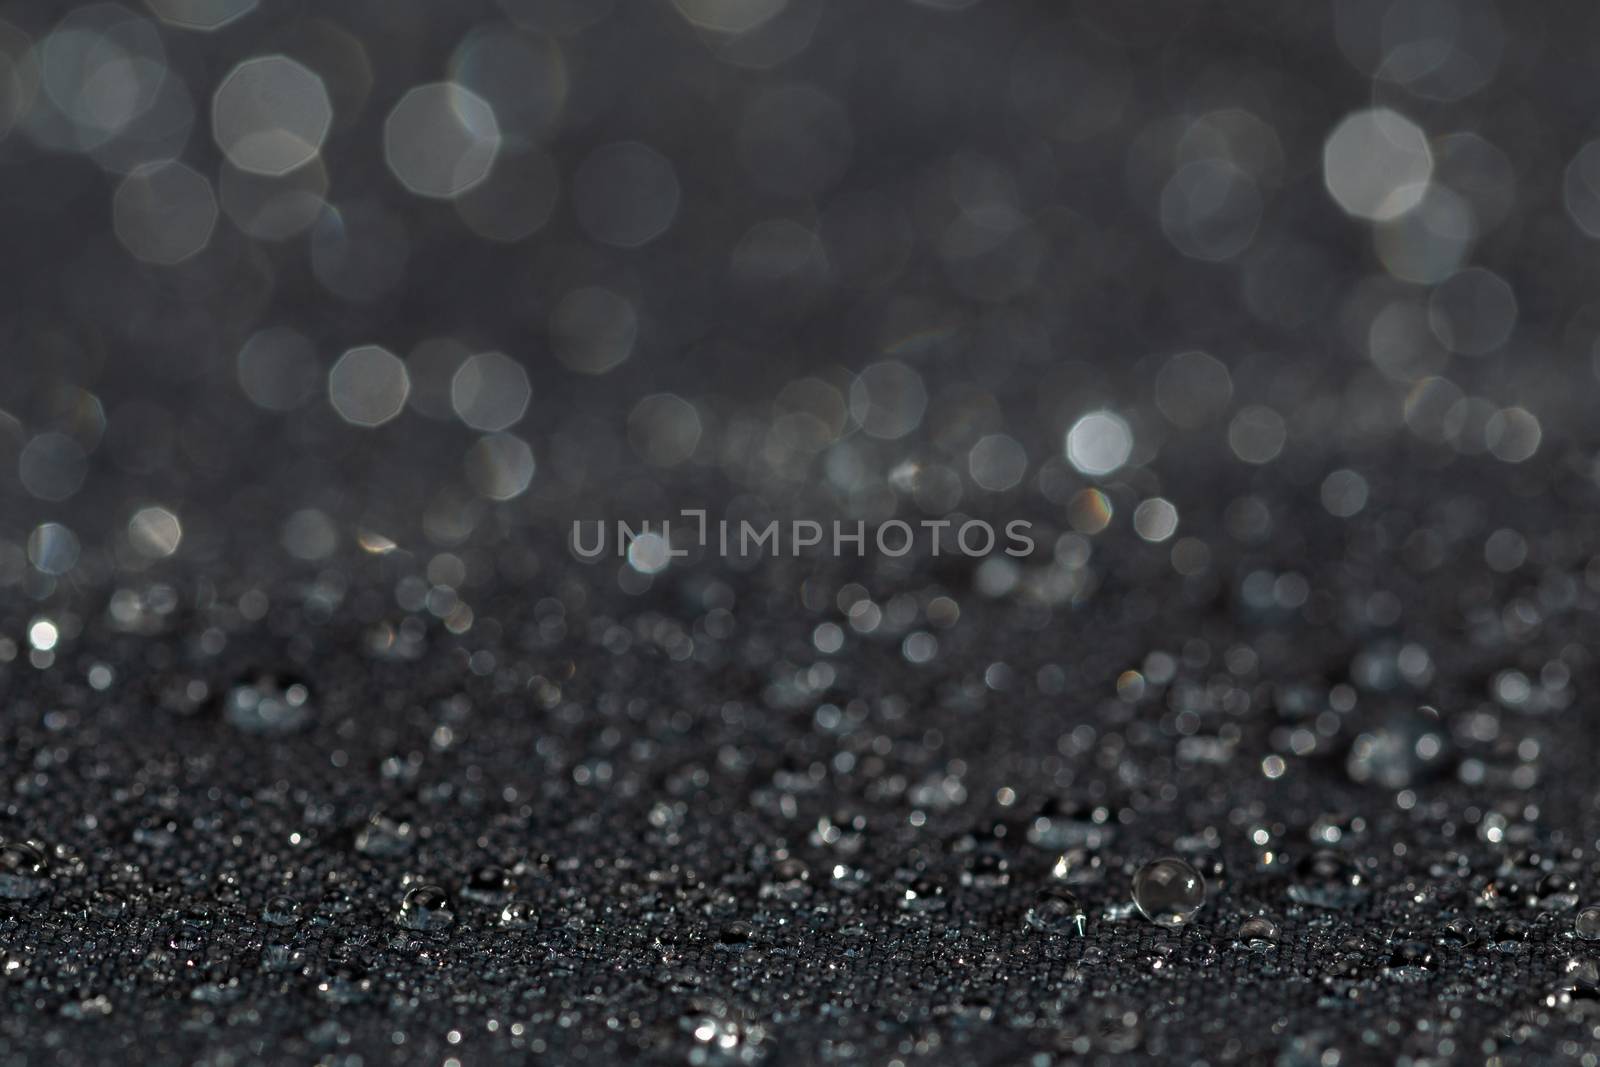 dark gray waterproof hydrophobic flat cloth closeup with water drops selective focus background.